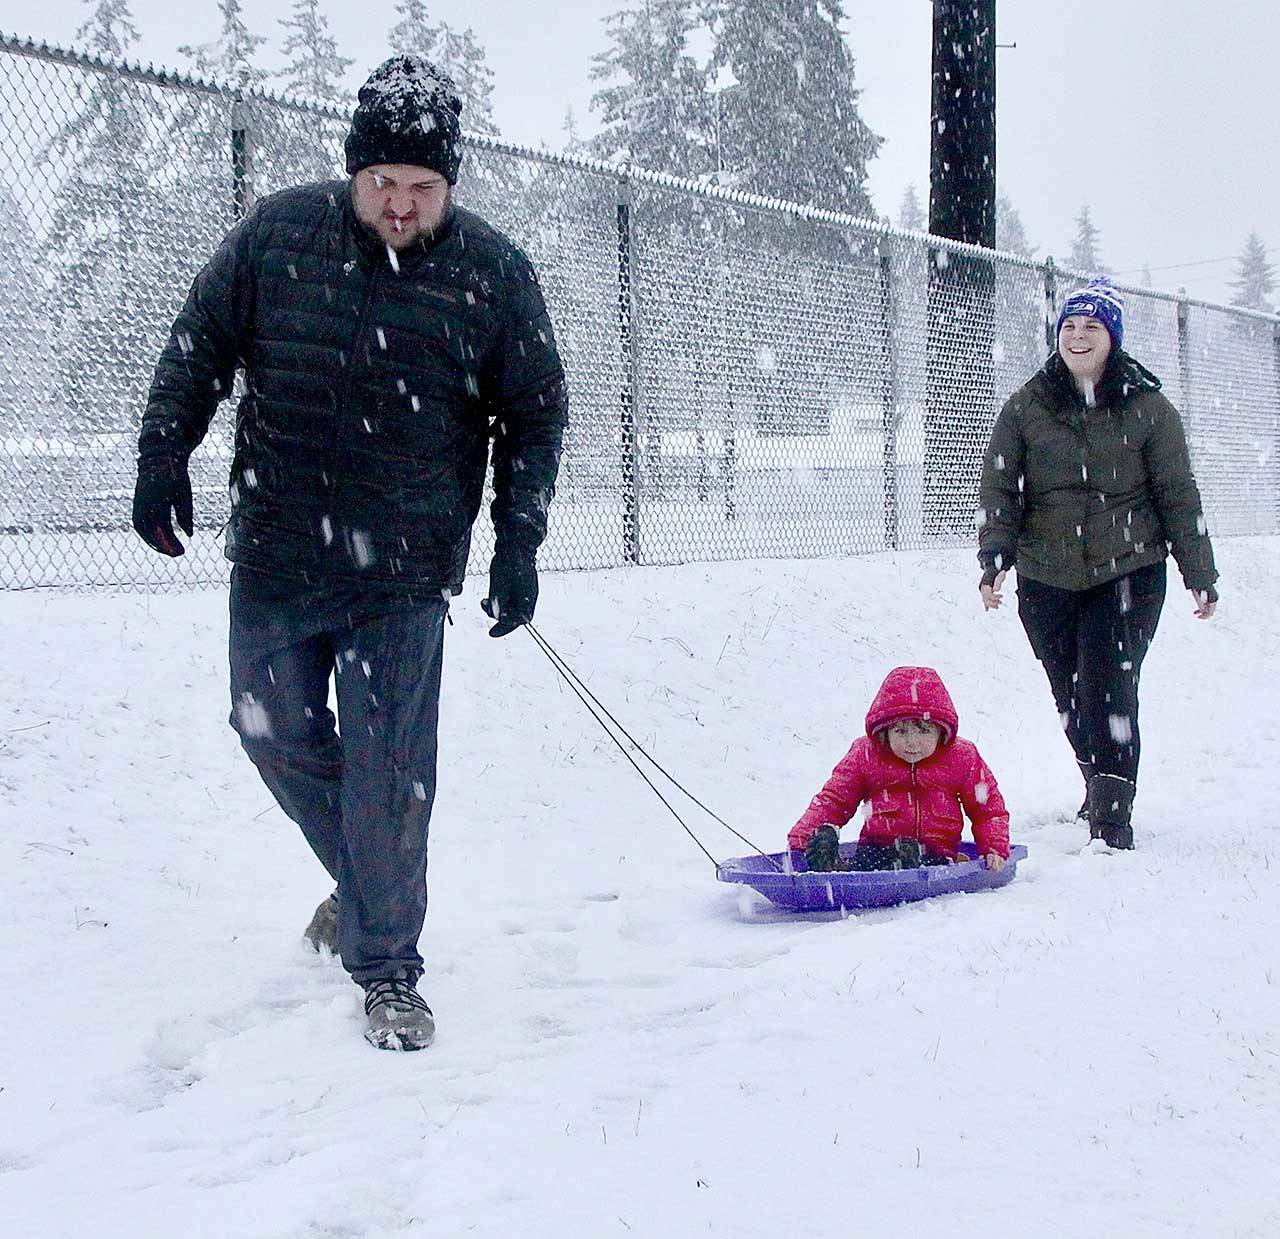 Jarrett and LeAnn Hansen took their daughter H.J., 2, out sliding just outside the fence of Elks Playfield on Pine Street on Monday during the first snow of the winter. (Dave Logan/for Peninsula Daily News)